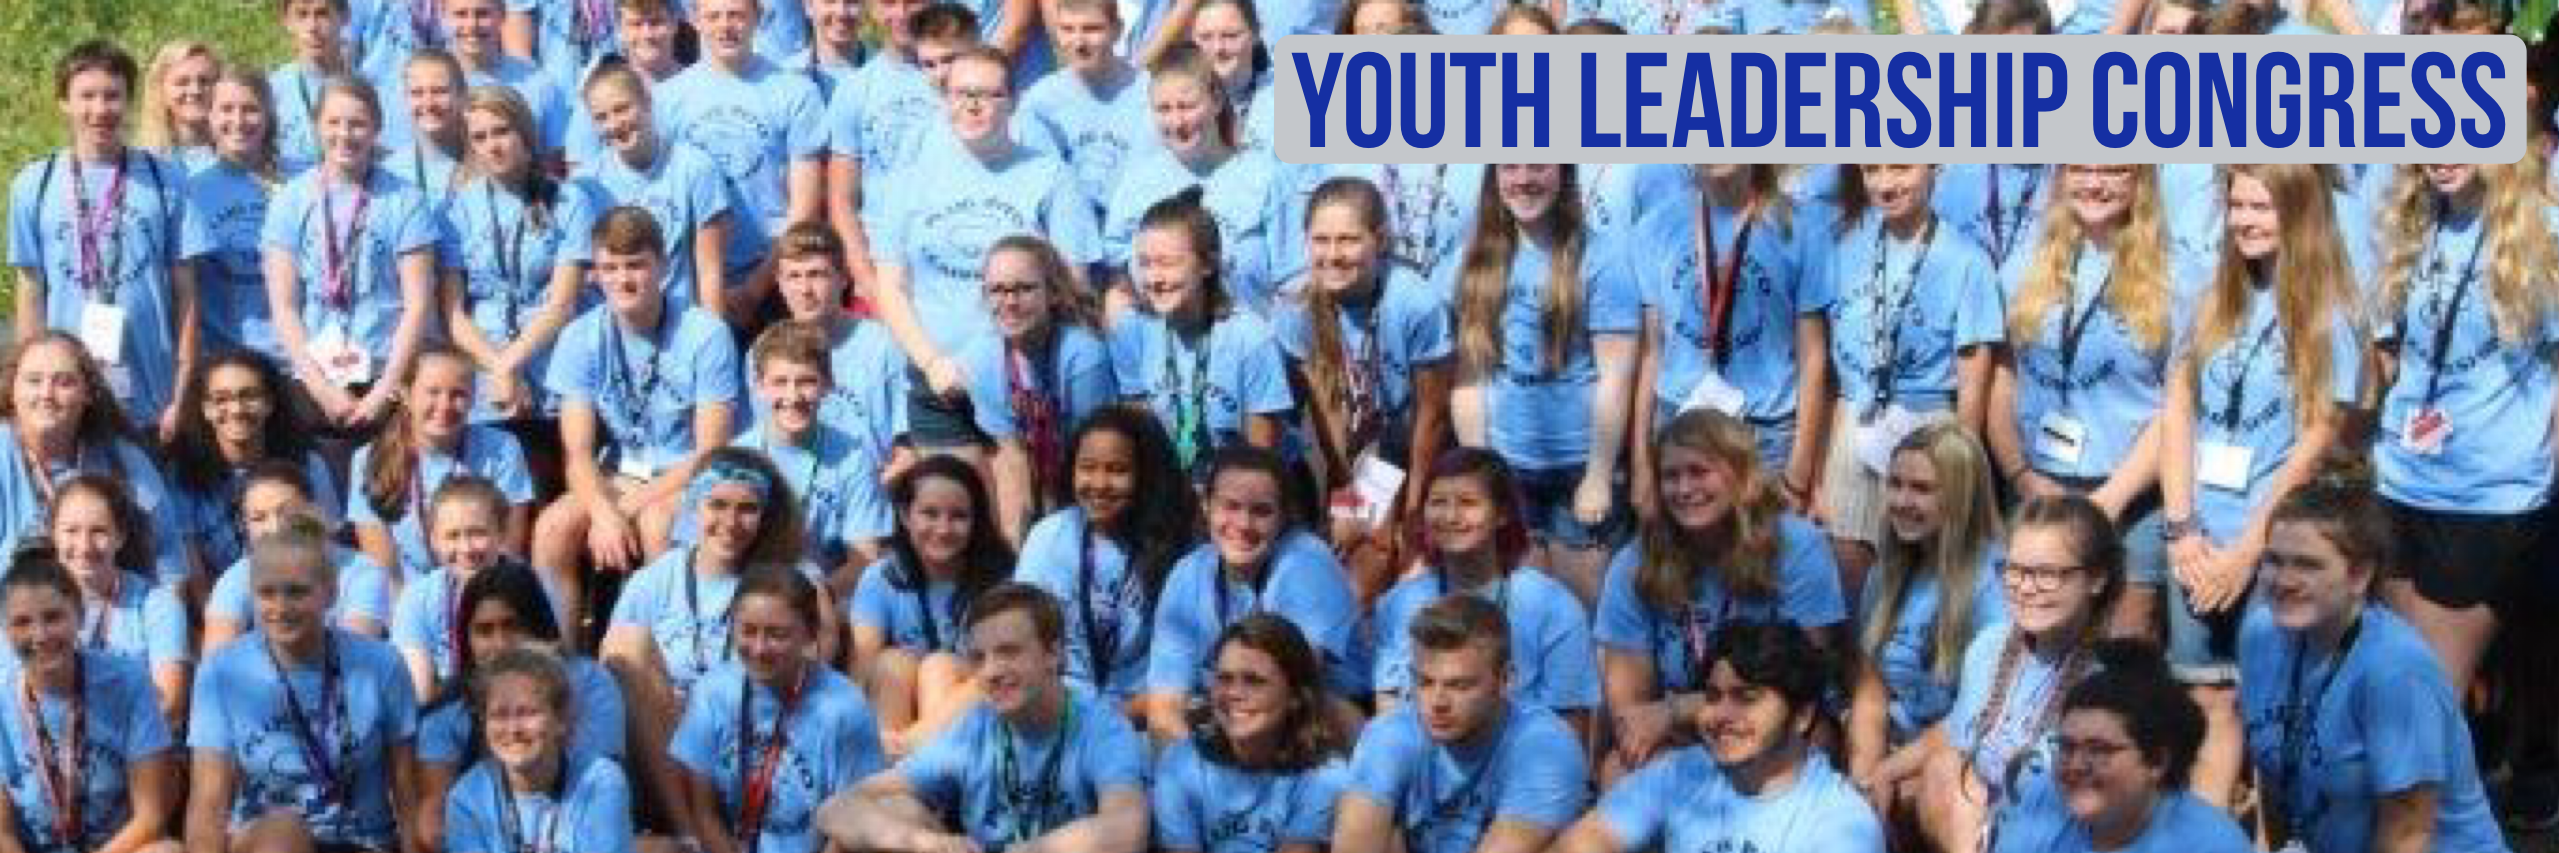 YLC Banner Photo.PNG